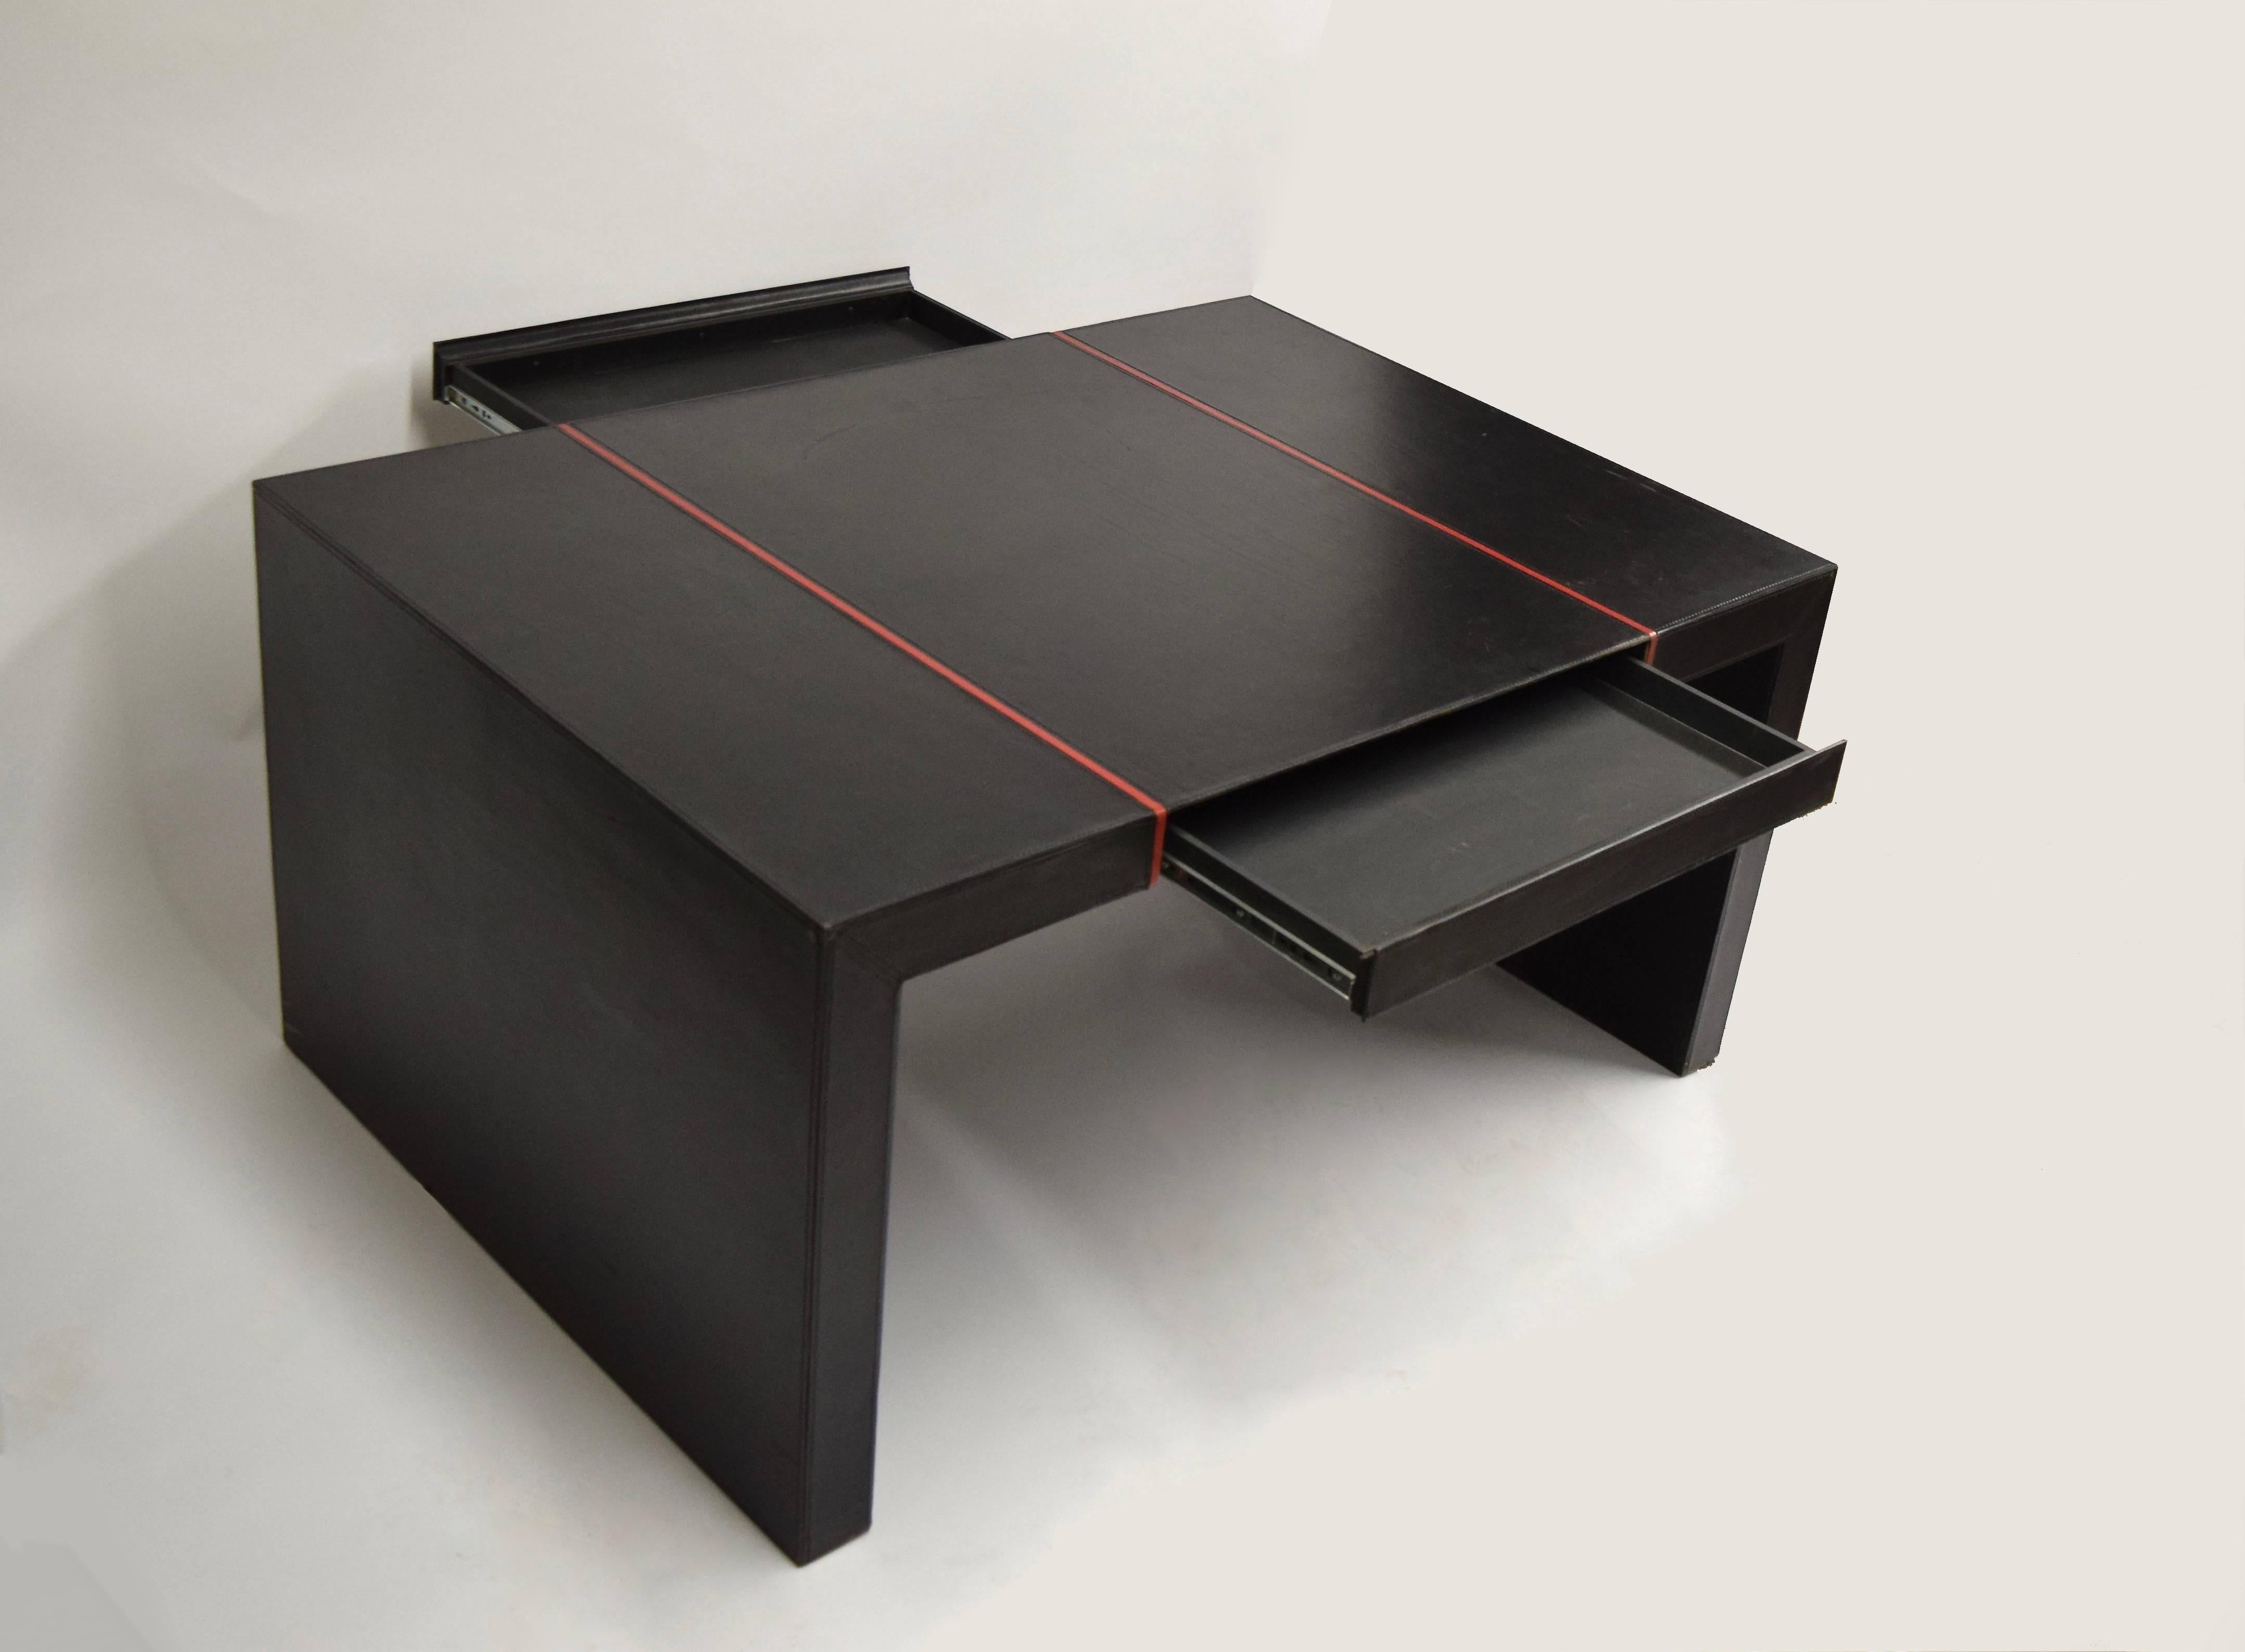 Partners desk in black leather with a red strip on each side. Free standing desk has a 3 1/2 inch thick frame with concealed drawers centered on both sides.